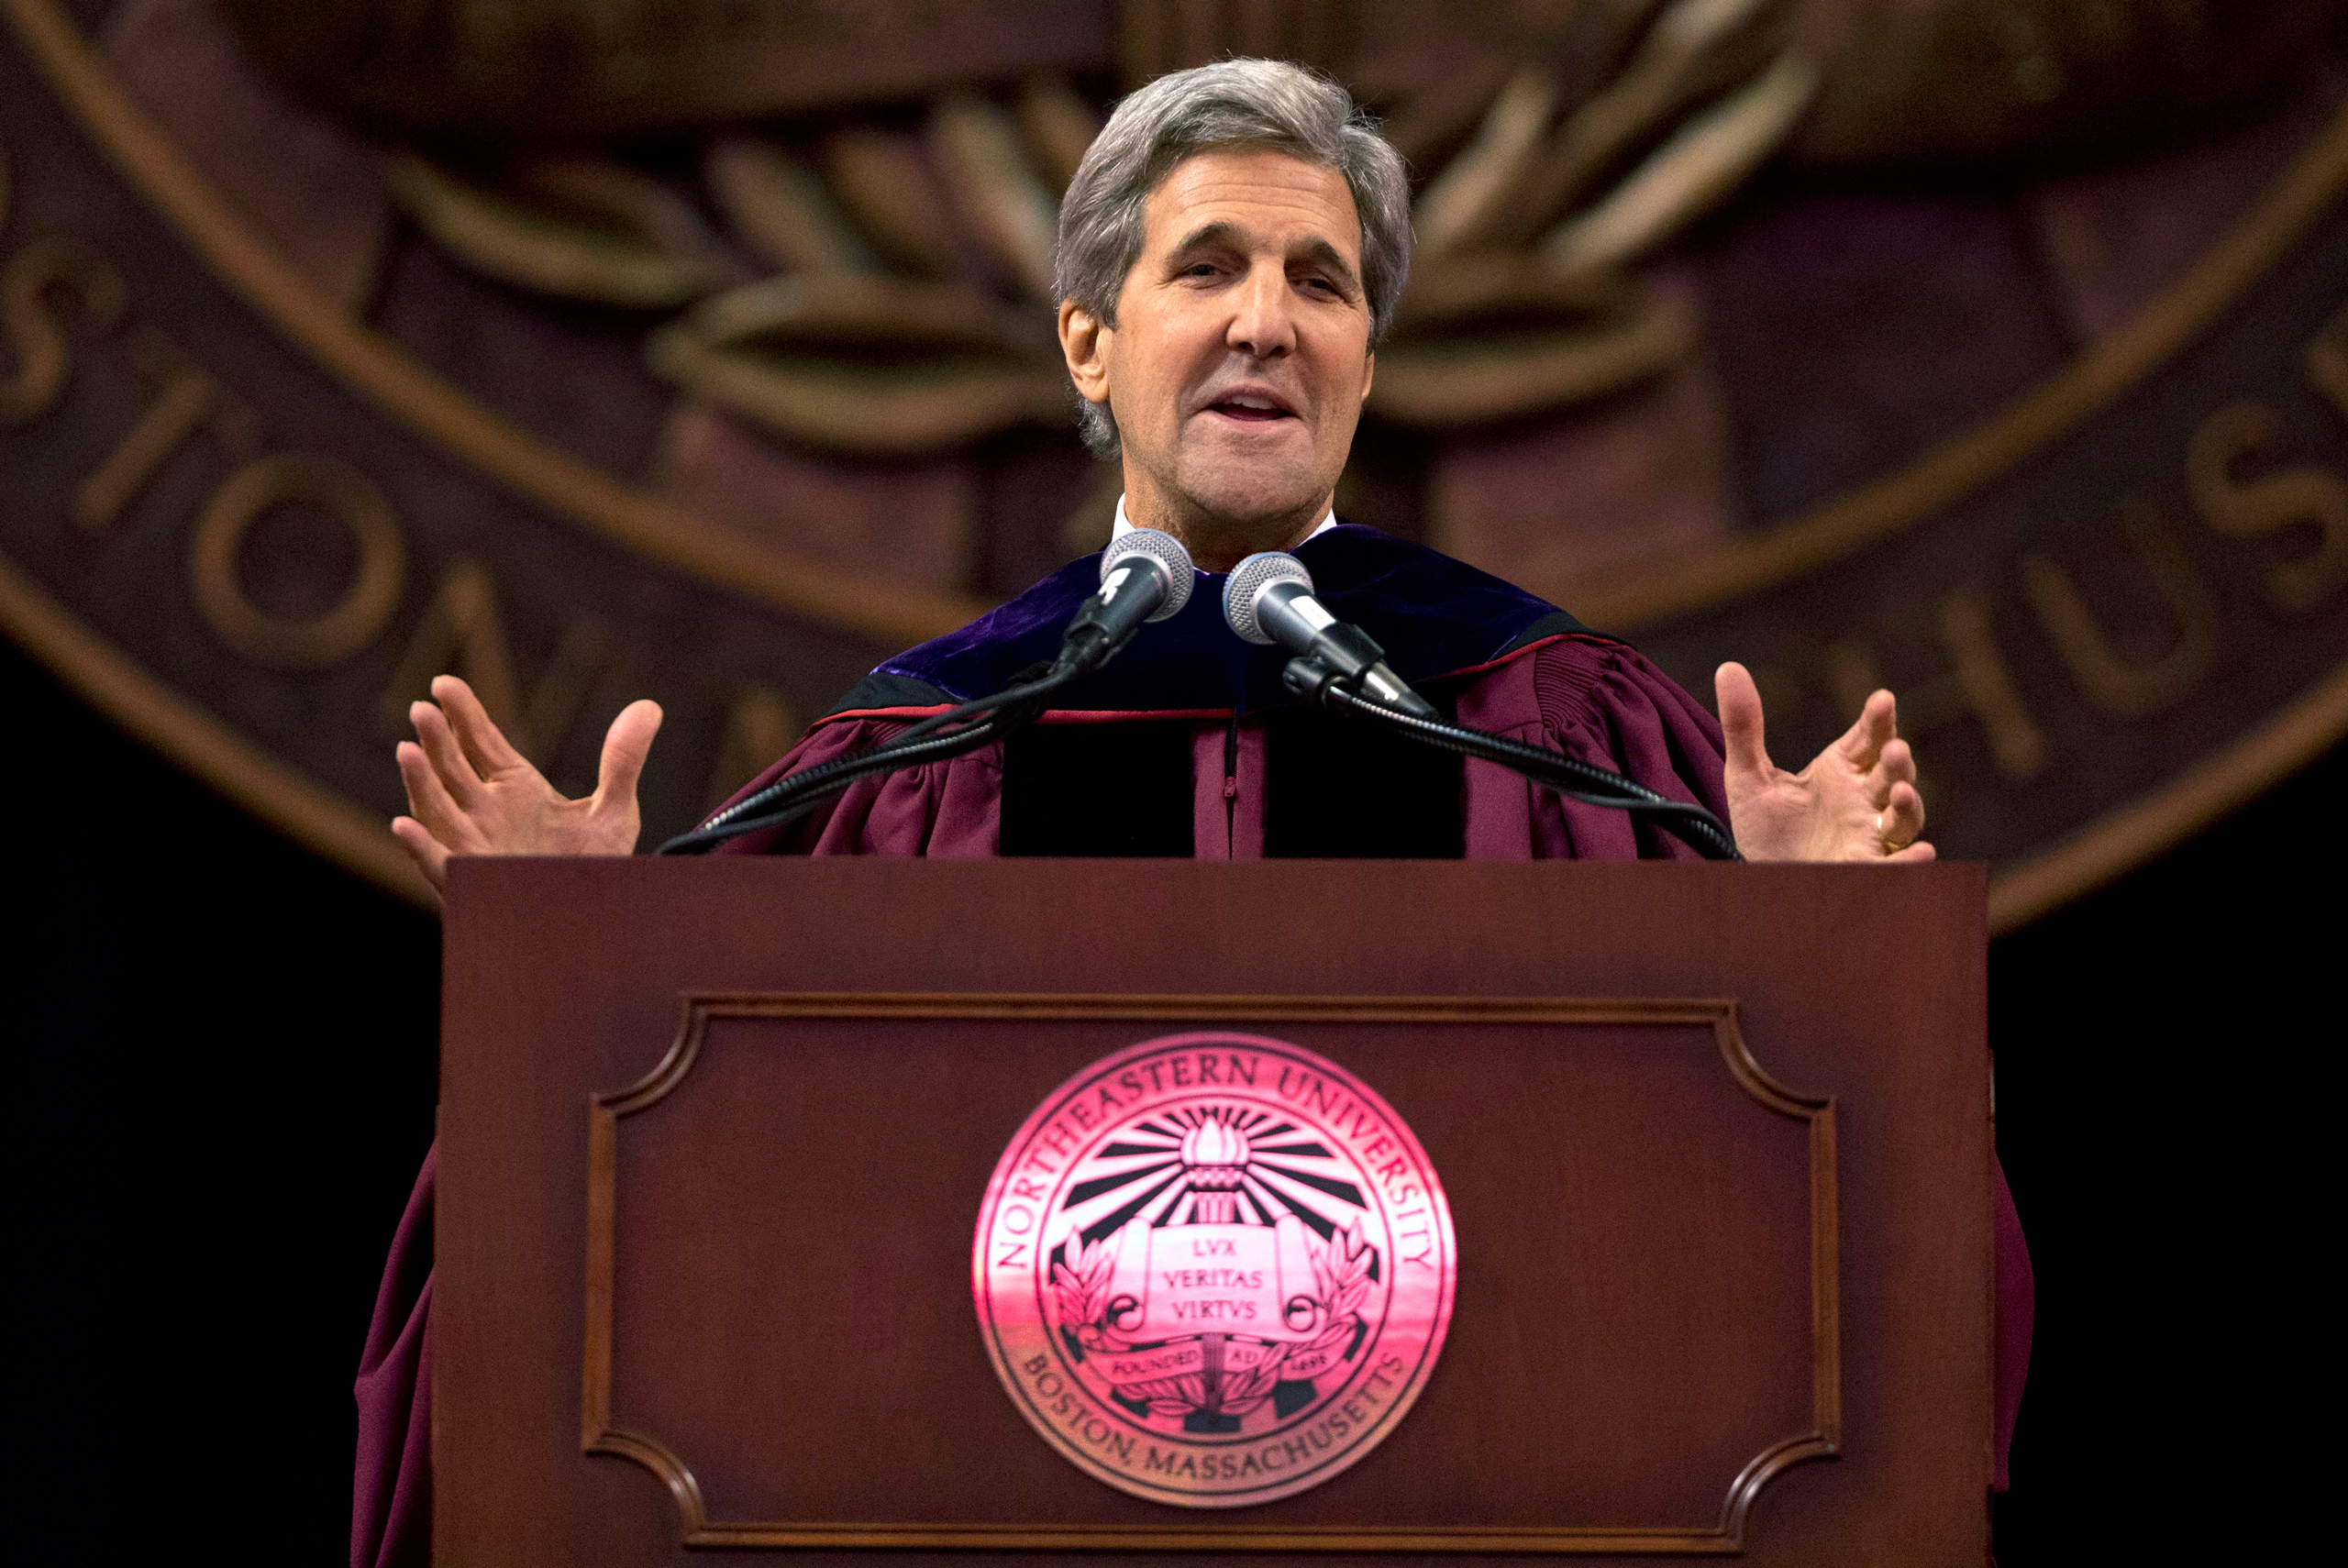 Secretary of State John Kerry gestures while giving the keynote address during Northeastern University's commencement ceremonies in Boston on May 6, 2016. (Michael Dwyer—AP)